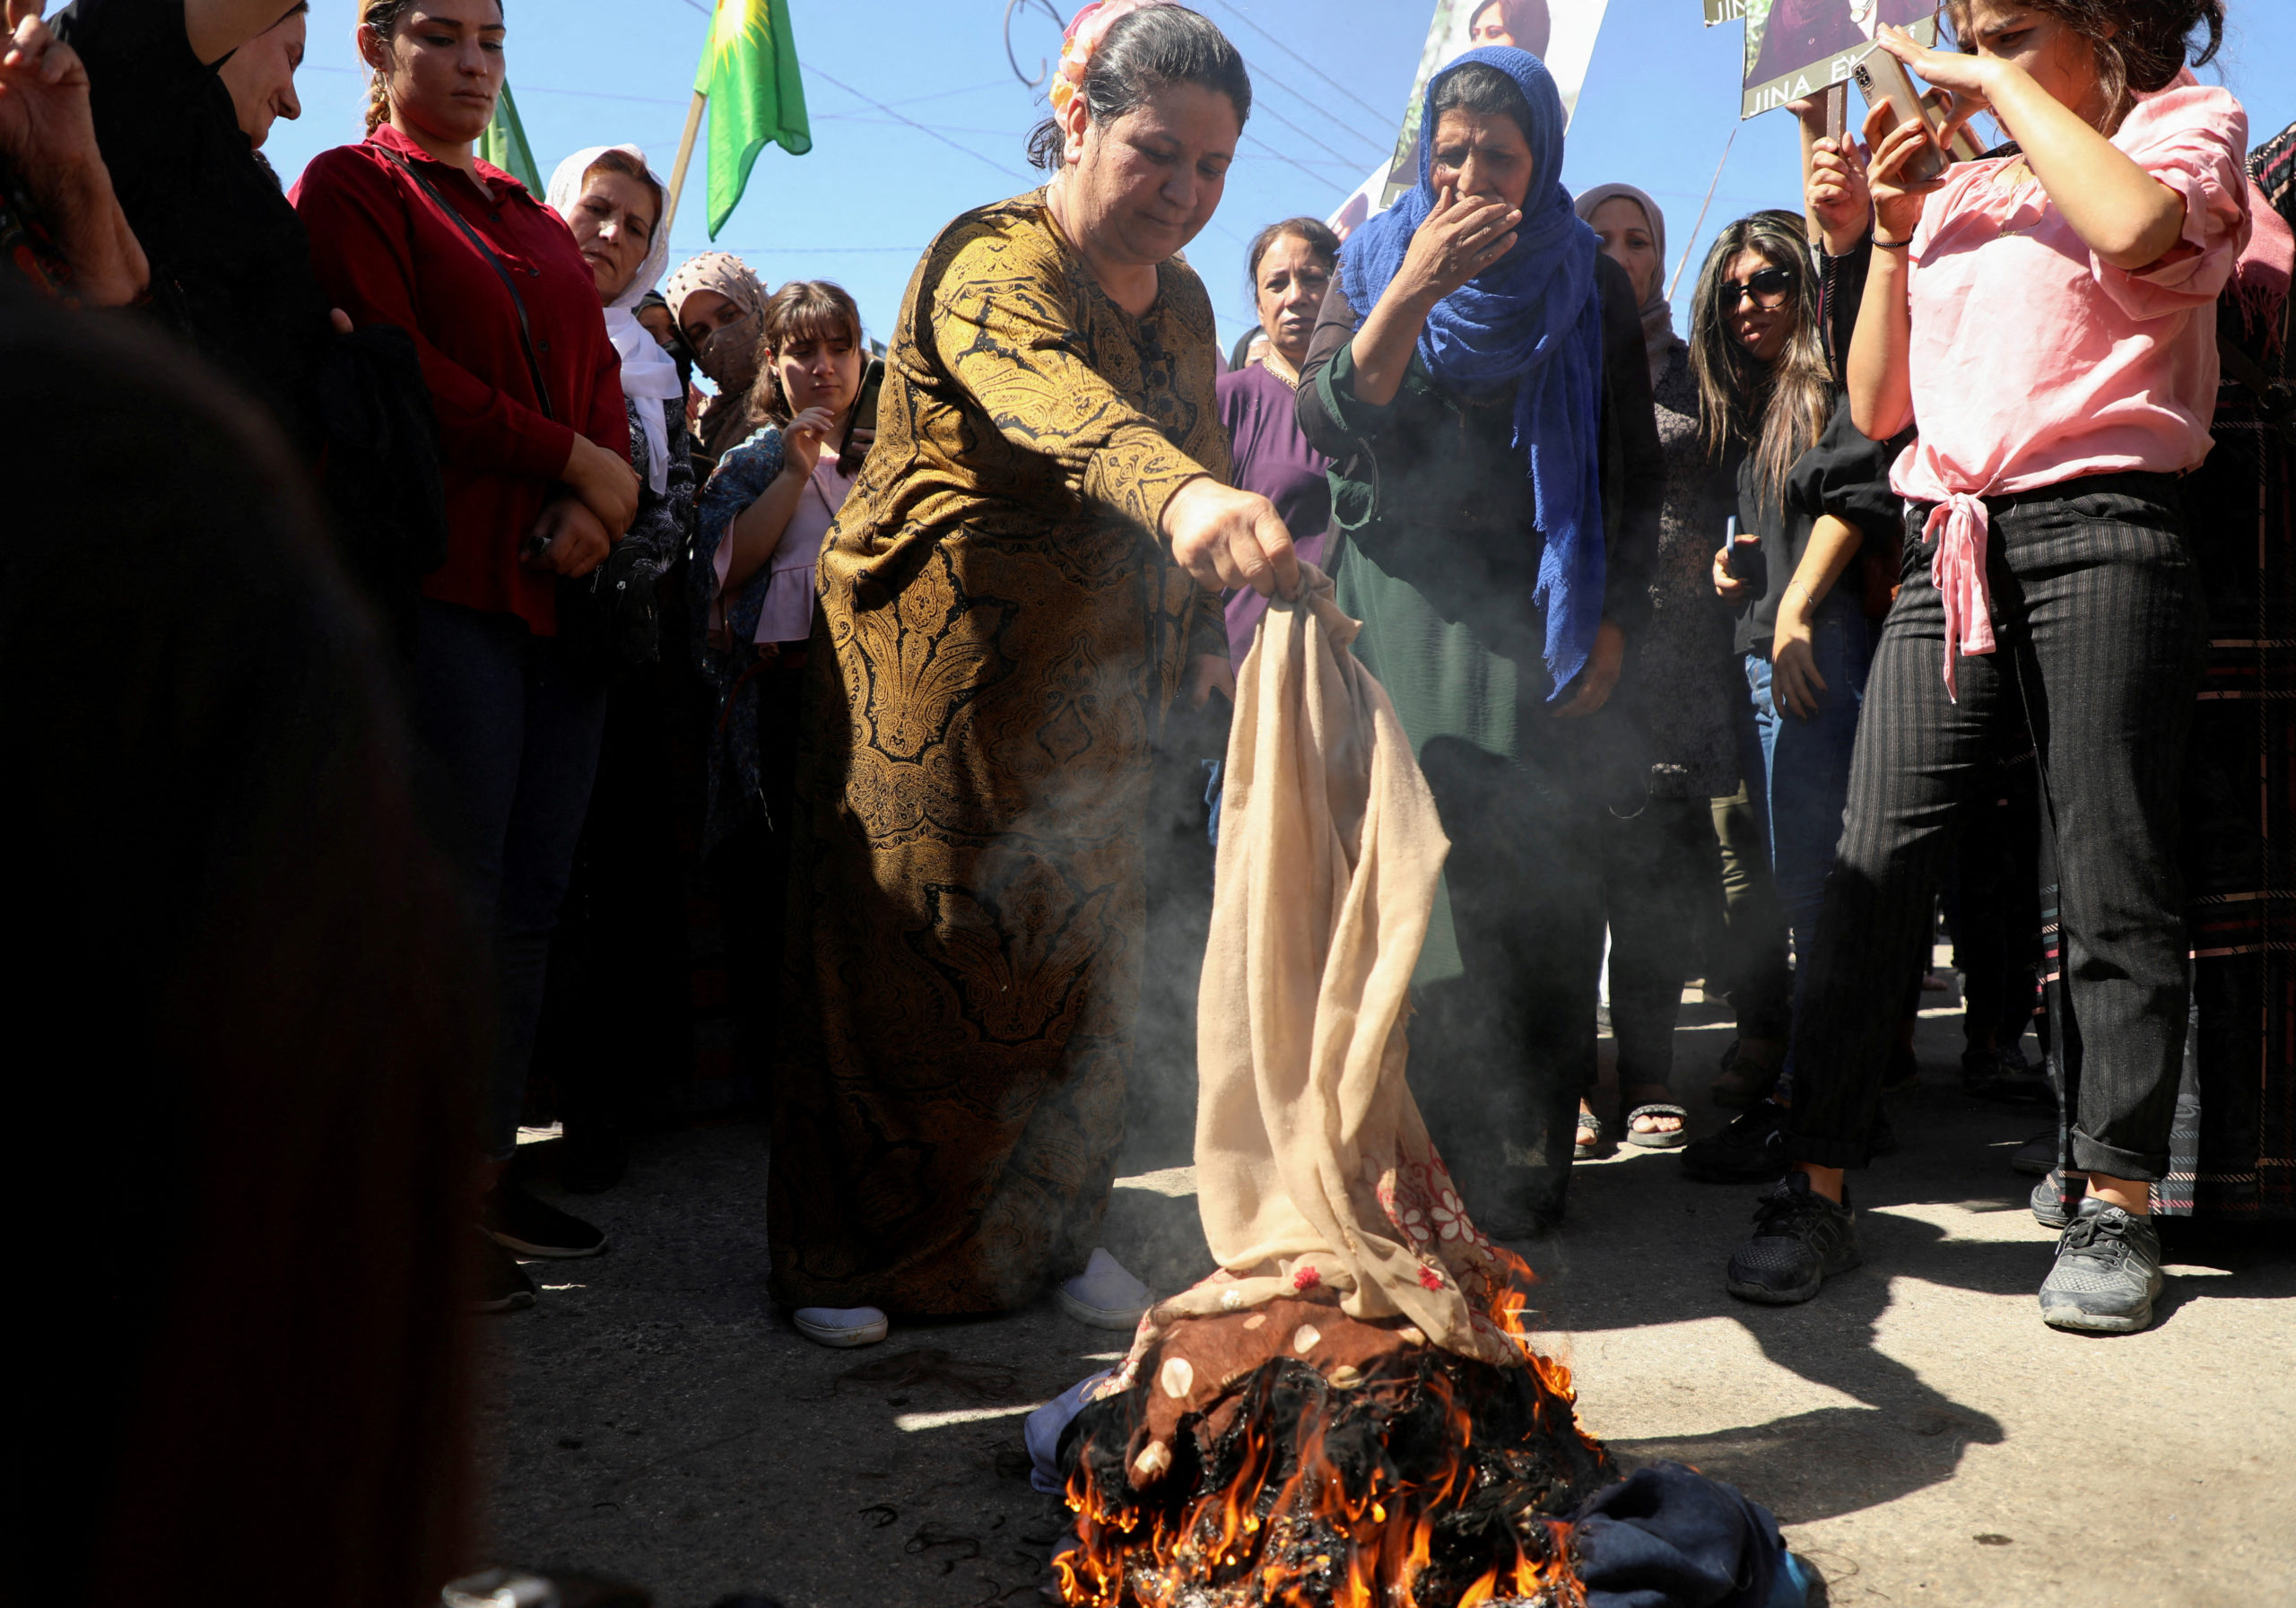 Women burn headscarves during a protest over the death of 22-year-old Kurdish woman Mahsa Amini in Iran, in the Kurdish-controlled city of Qamishli, northeastern Syria September 26, 2022.  REUTERS/Orhan Qereman/File Photo